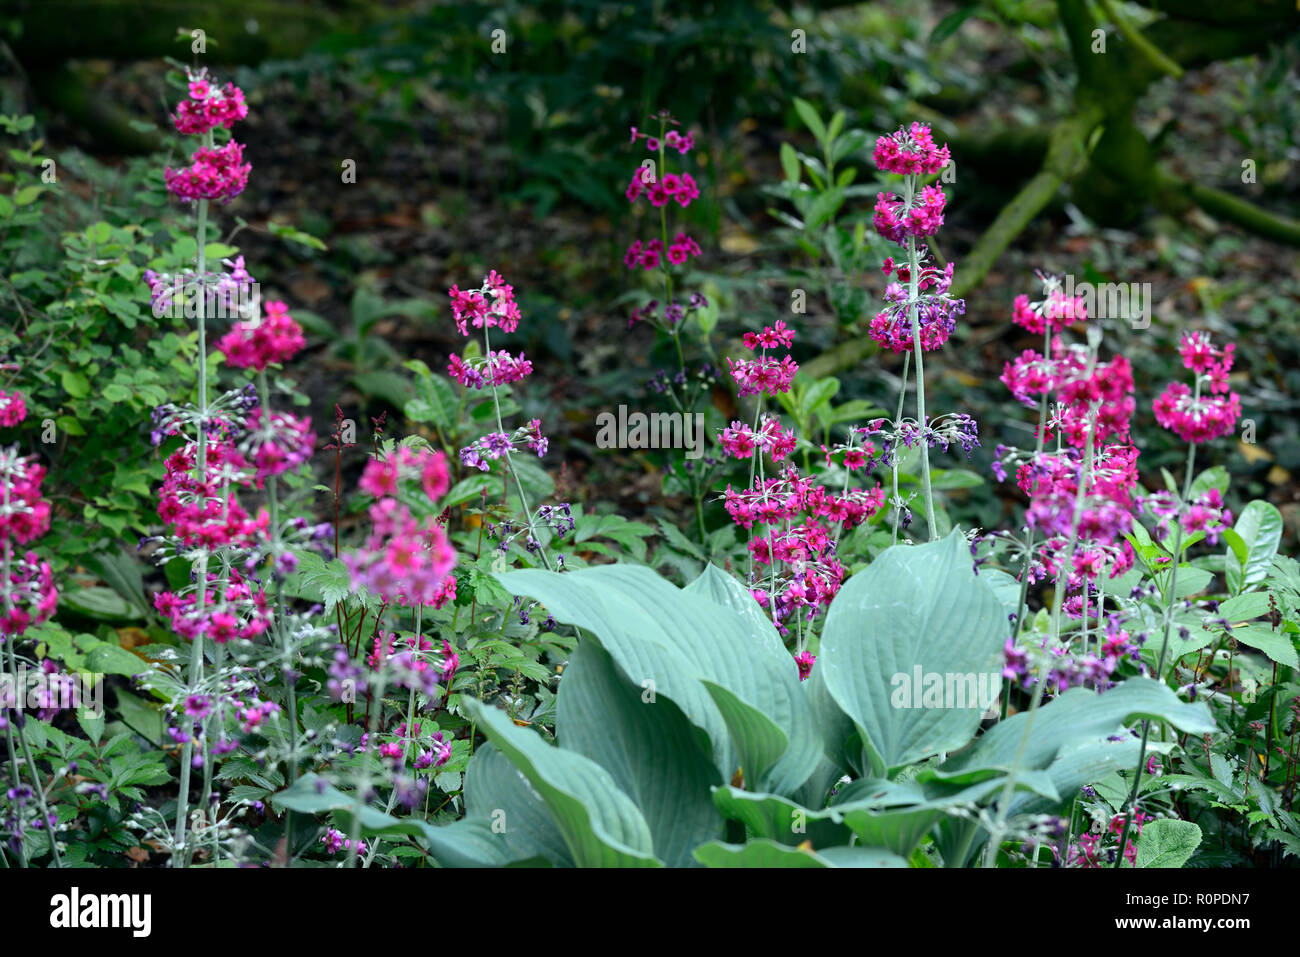 primula japonica millers crimson,japanese primrose,hosta,leaves,foliage,shade,shady,shaded,moist,boggy,water,loving,garden,RM Floral Stock Photo